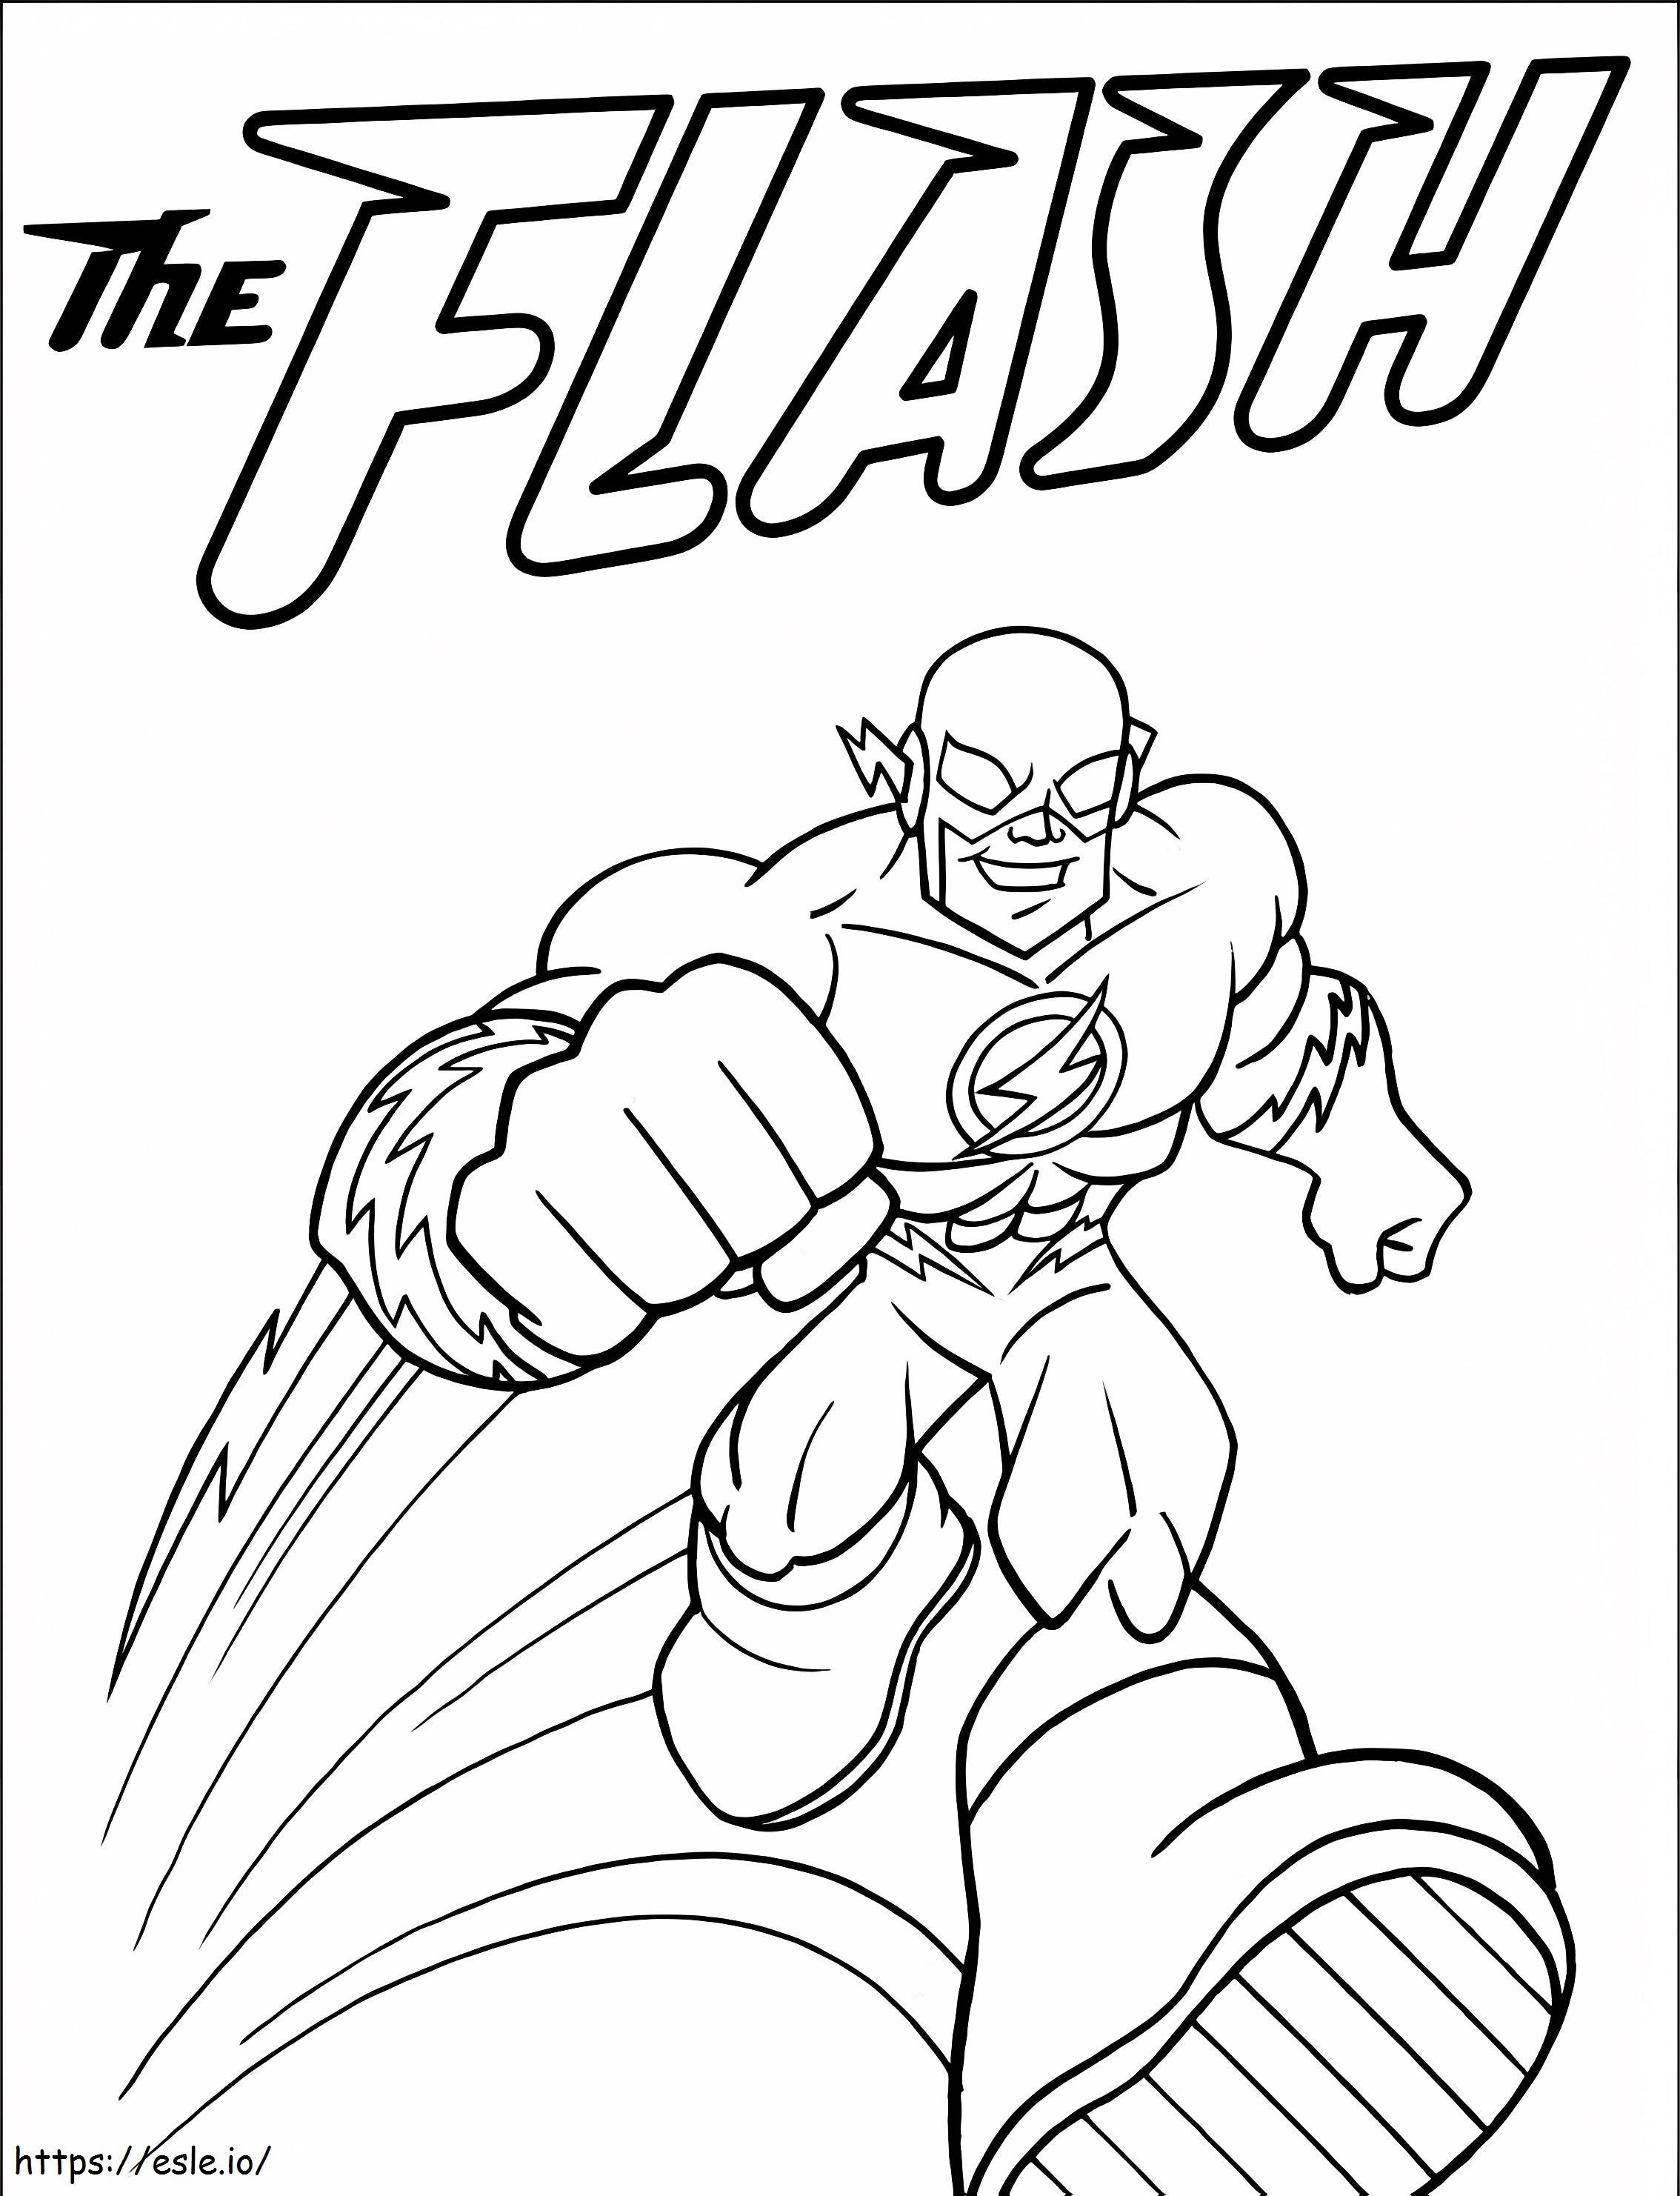 Funny The Flash coloring page